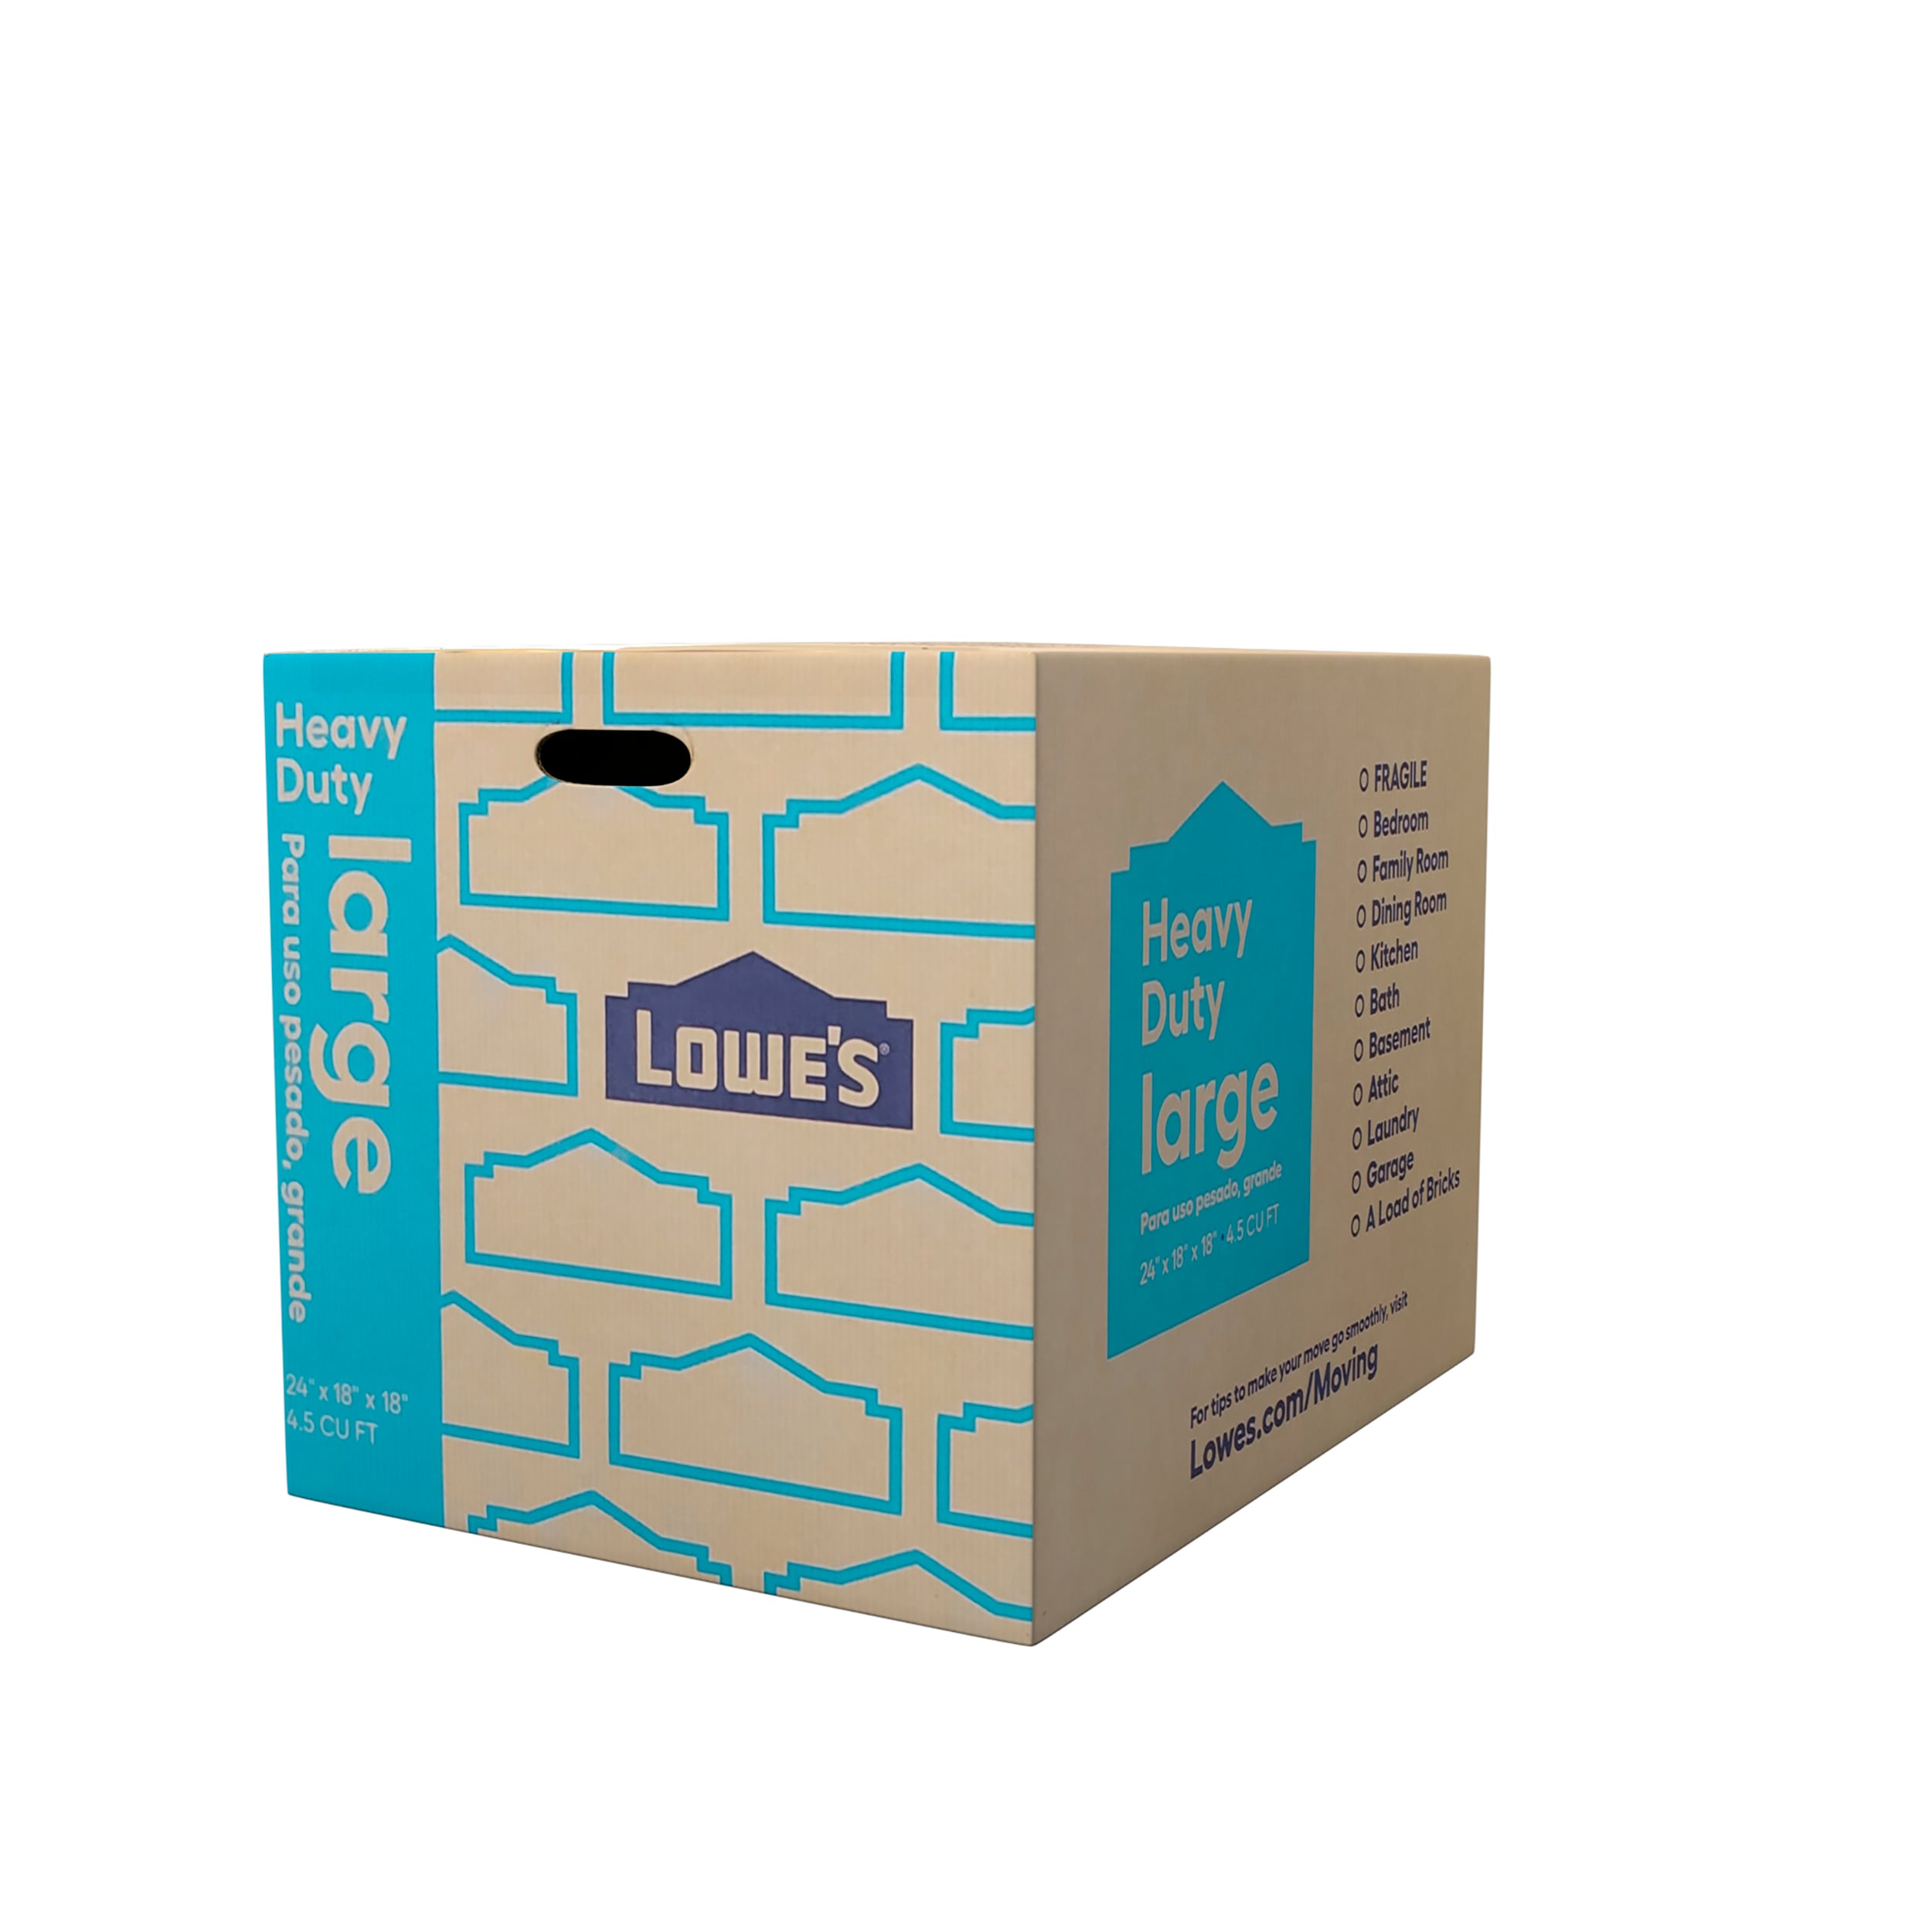 Lowe's 24-in W x 18-in H x 18-in D Large Heavy Duty Cardboard Moving Box  with Handle Holes in the Moving Boxes department at